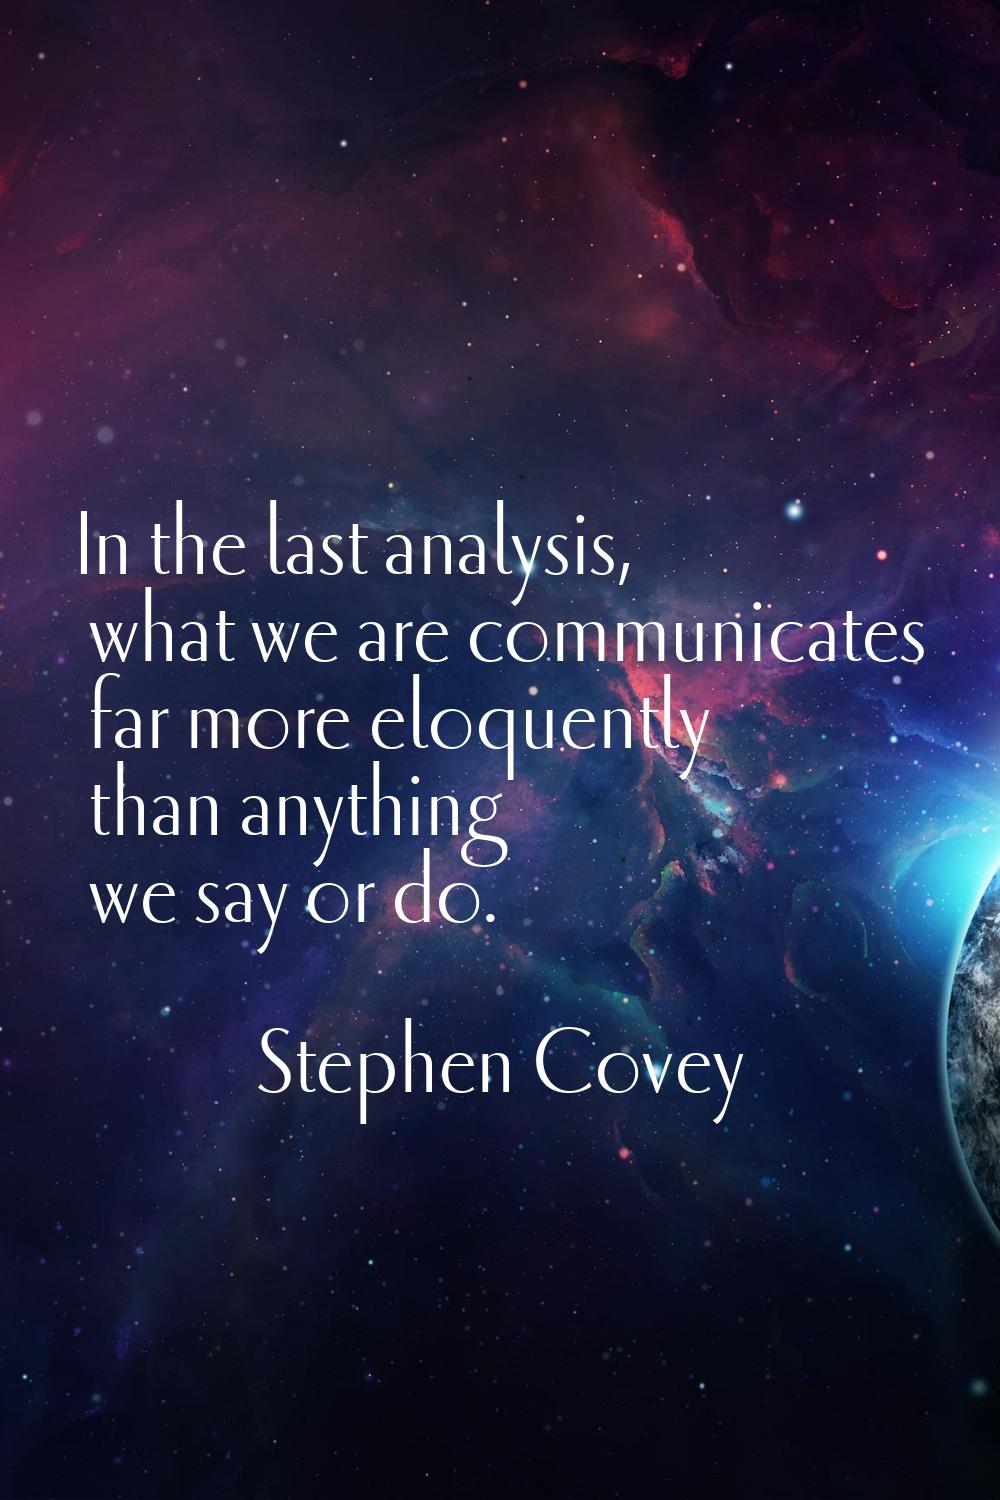 In the last analysis, what we are communicates far more eloquently than anything we say or do.